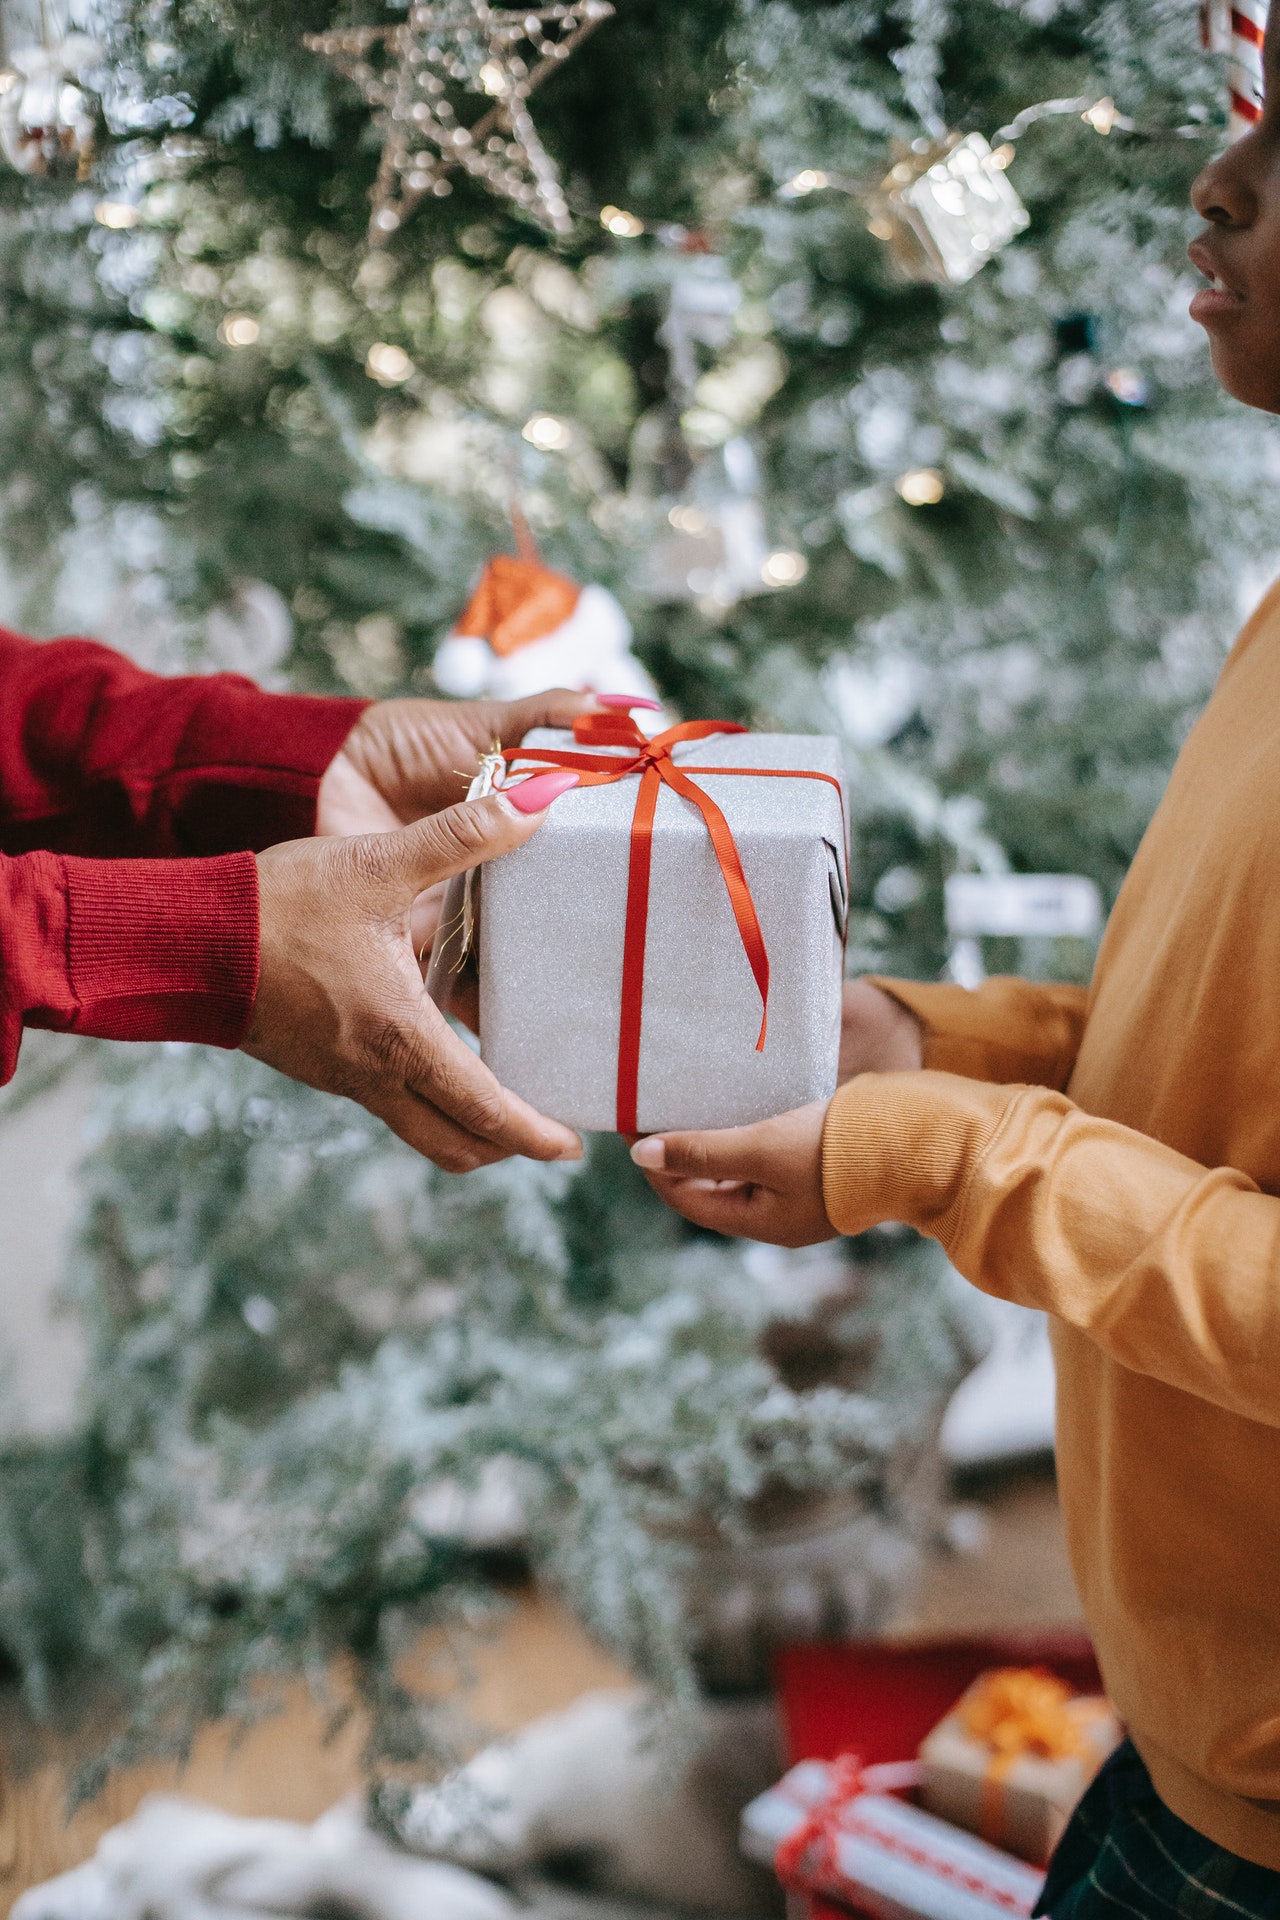 Keeping community at the heart of your holiday season